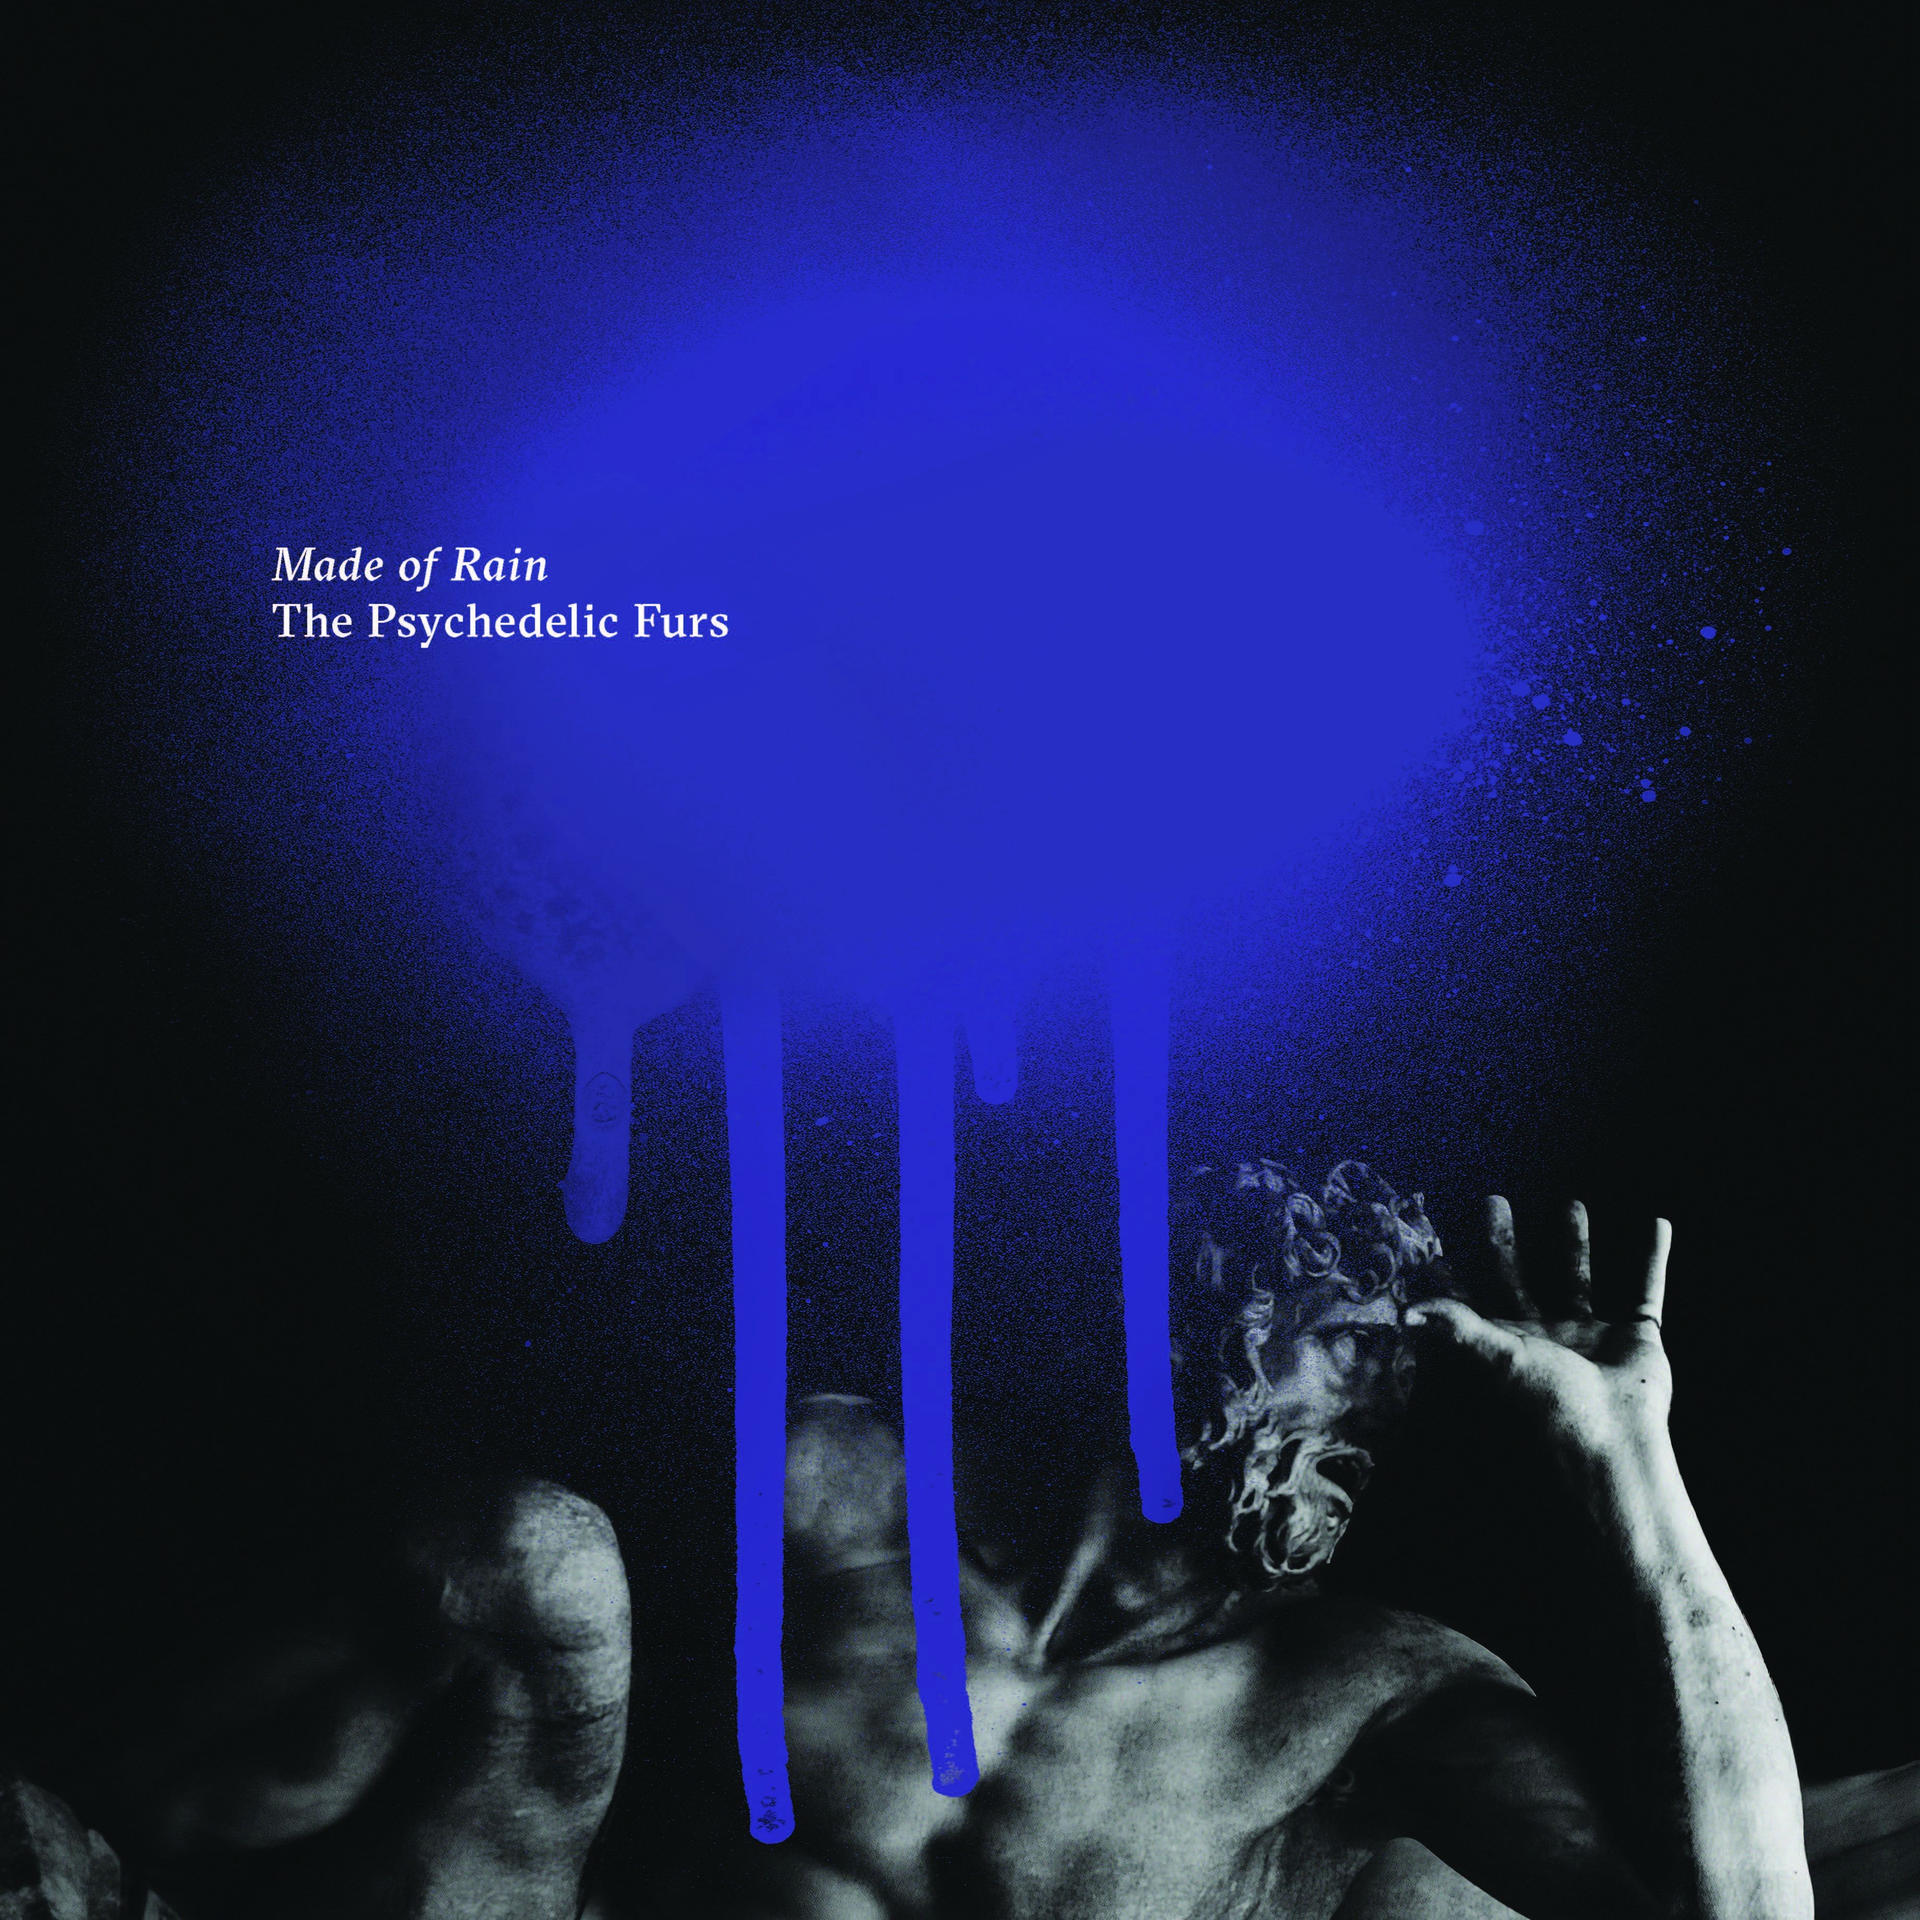 - (Vinyl) Rain The Furs Psychedelic of Made -